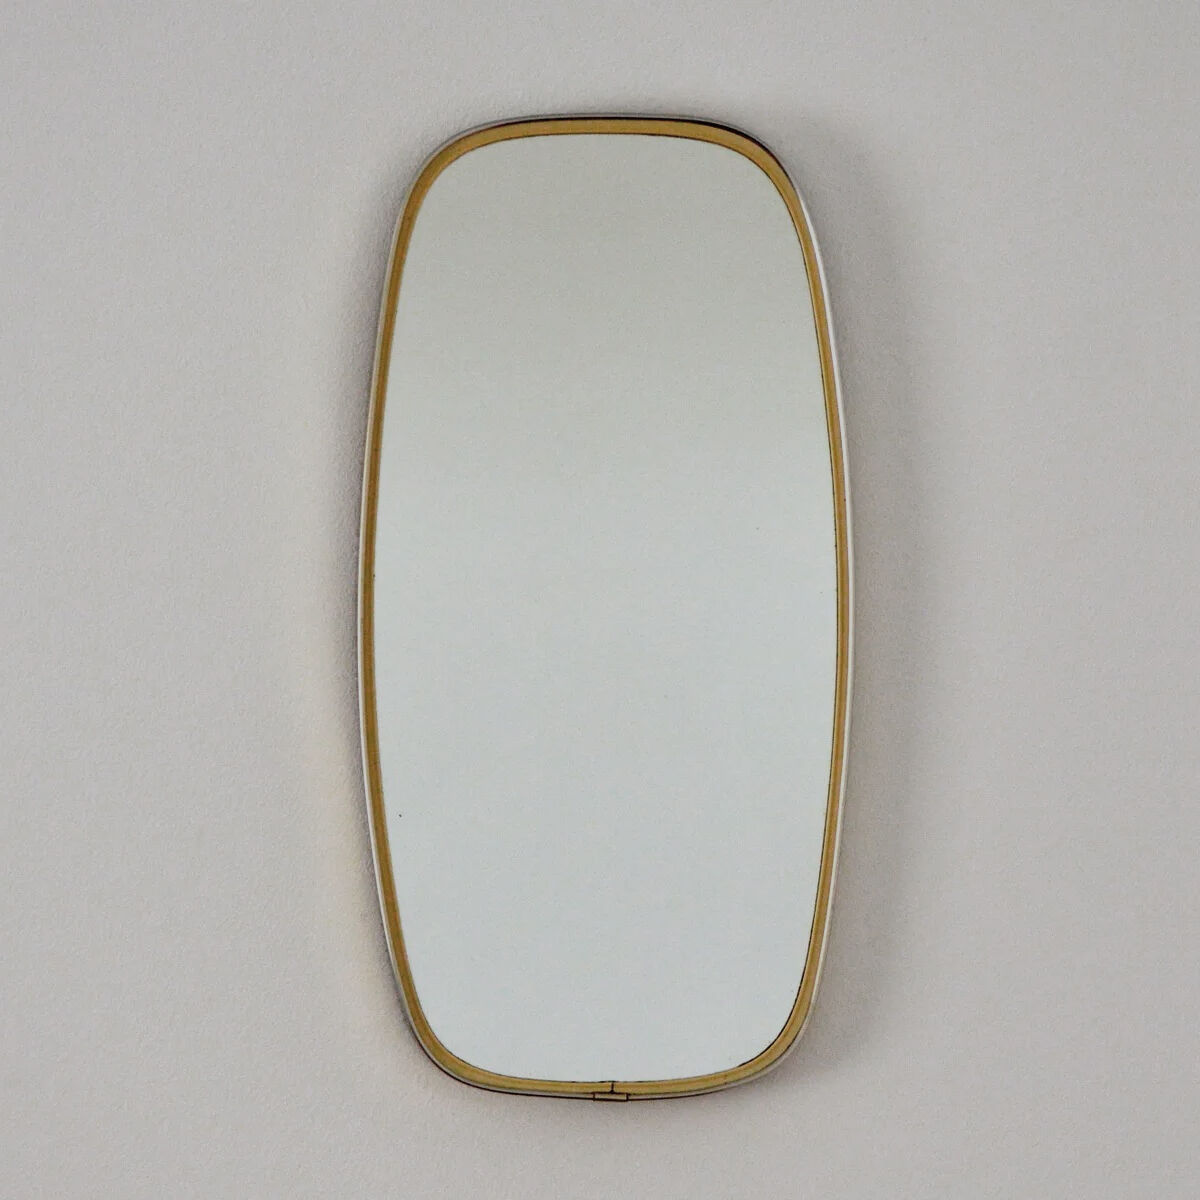 OVER HERE FOR ASYMMETRICAL MIRRORS FOR LESS THAN 100 EUROS